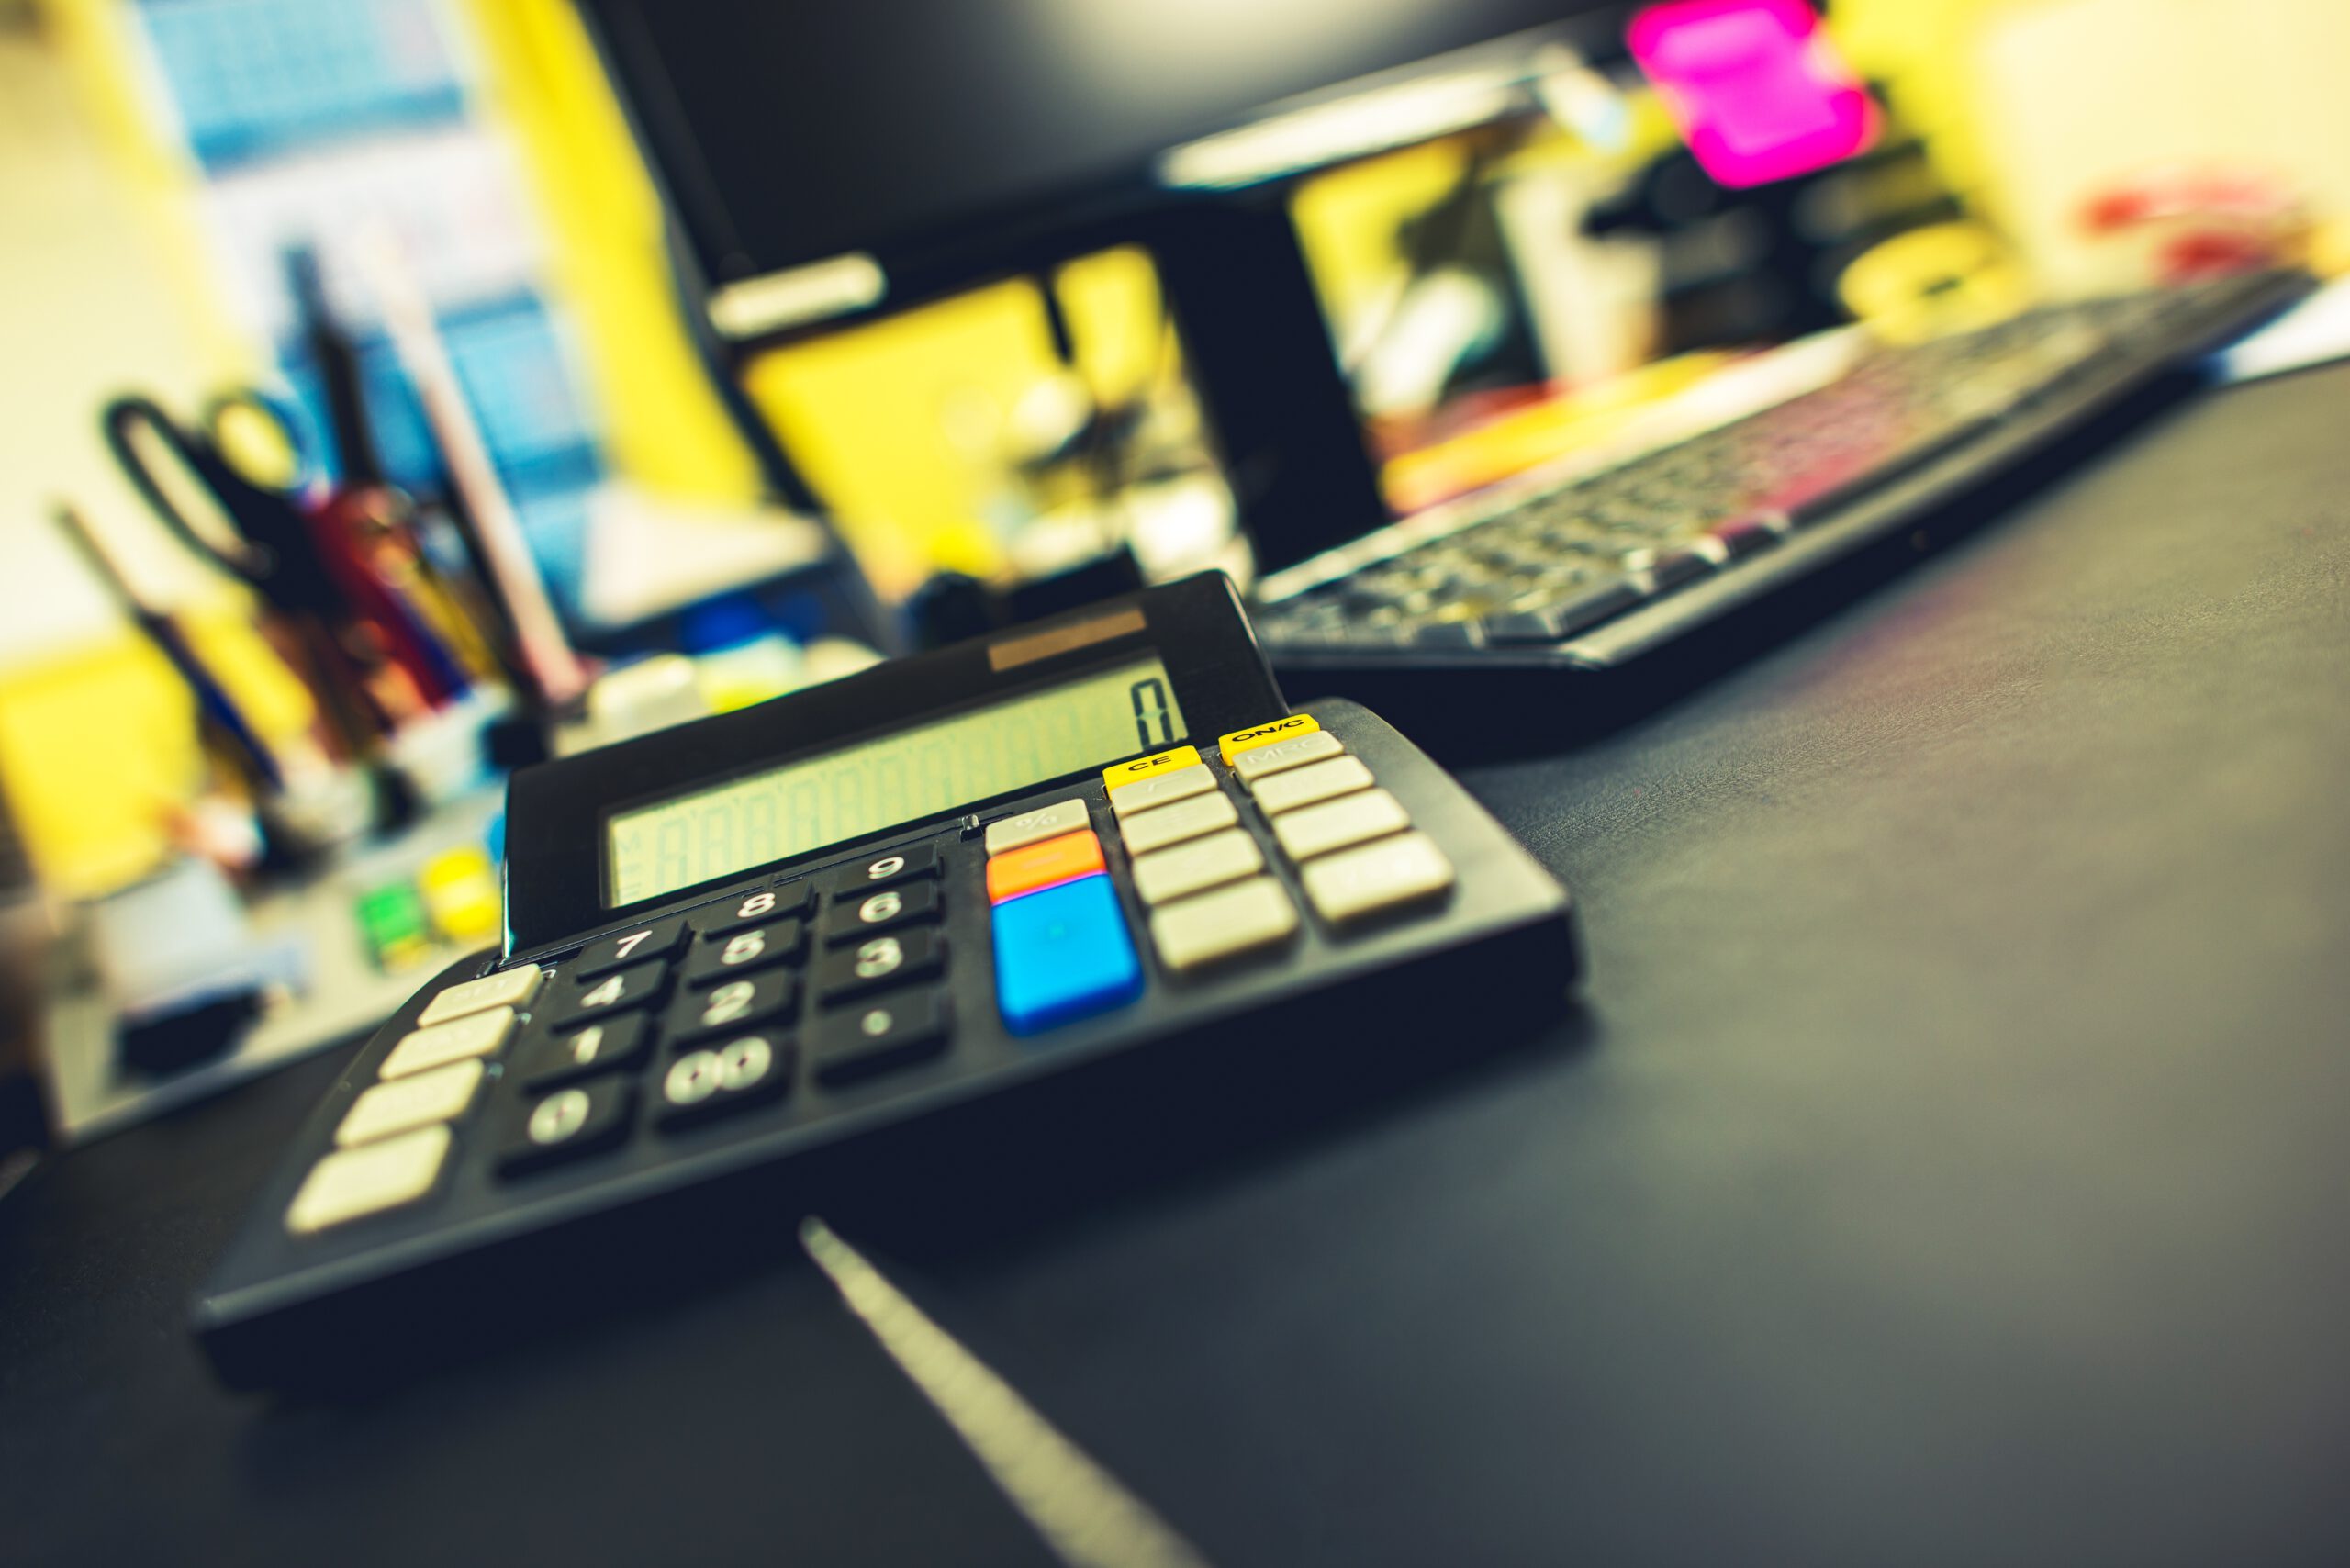 Office and Accounting Concept. Compact Calculator Device on the Accountant Desk.